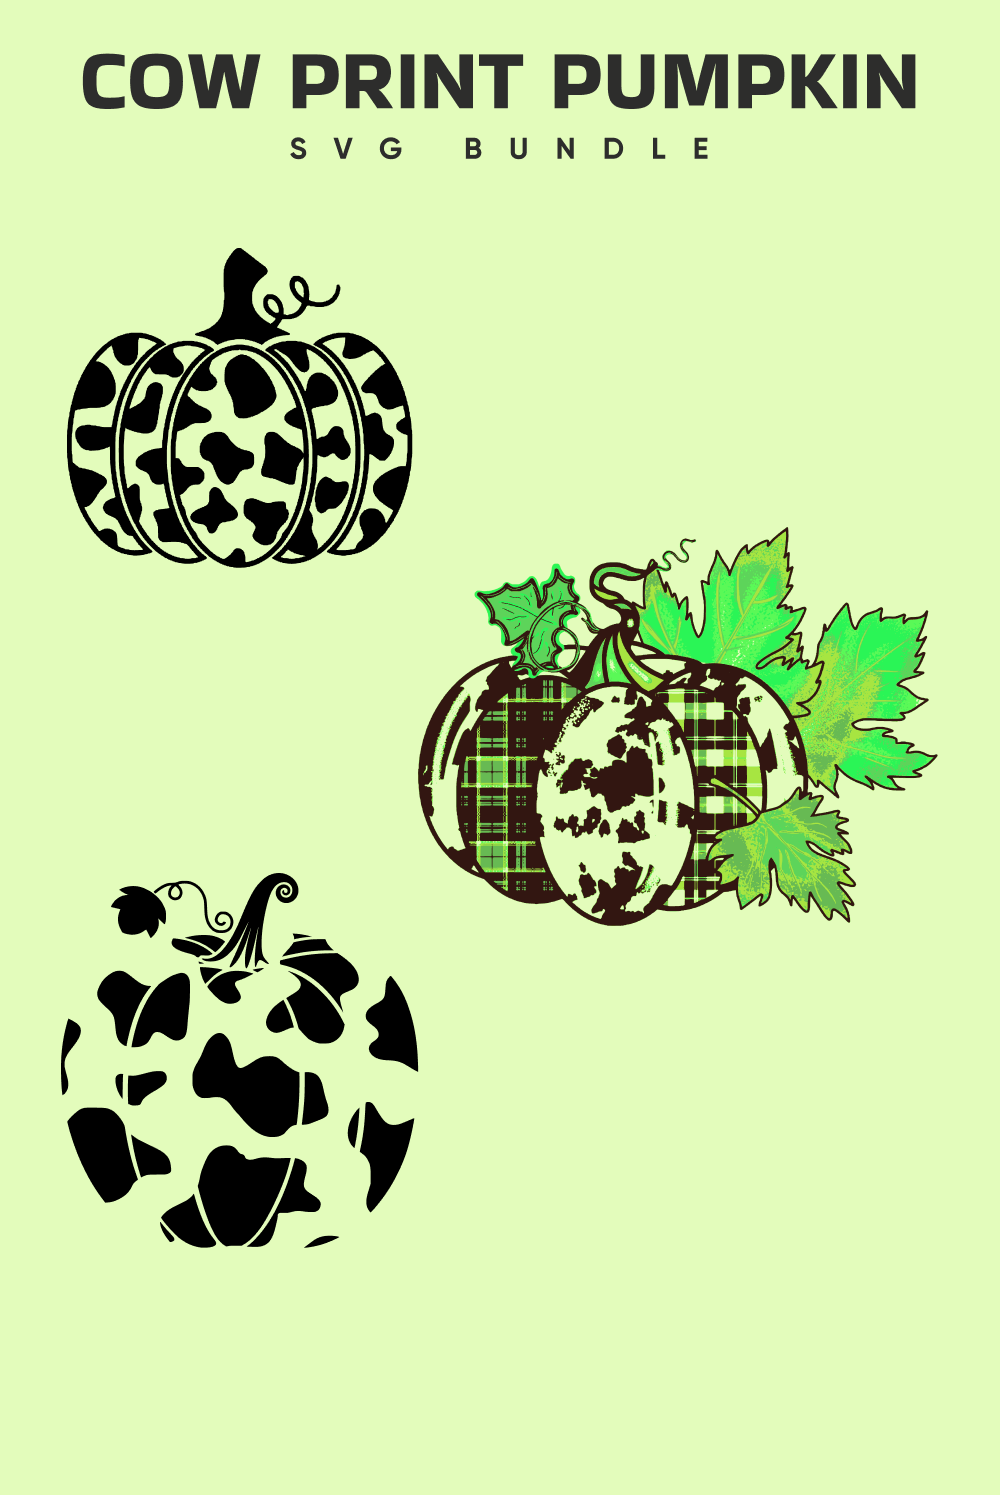 Green background with black and white pumpkins.